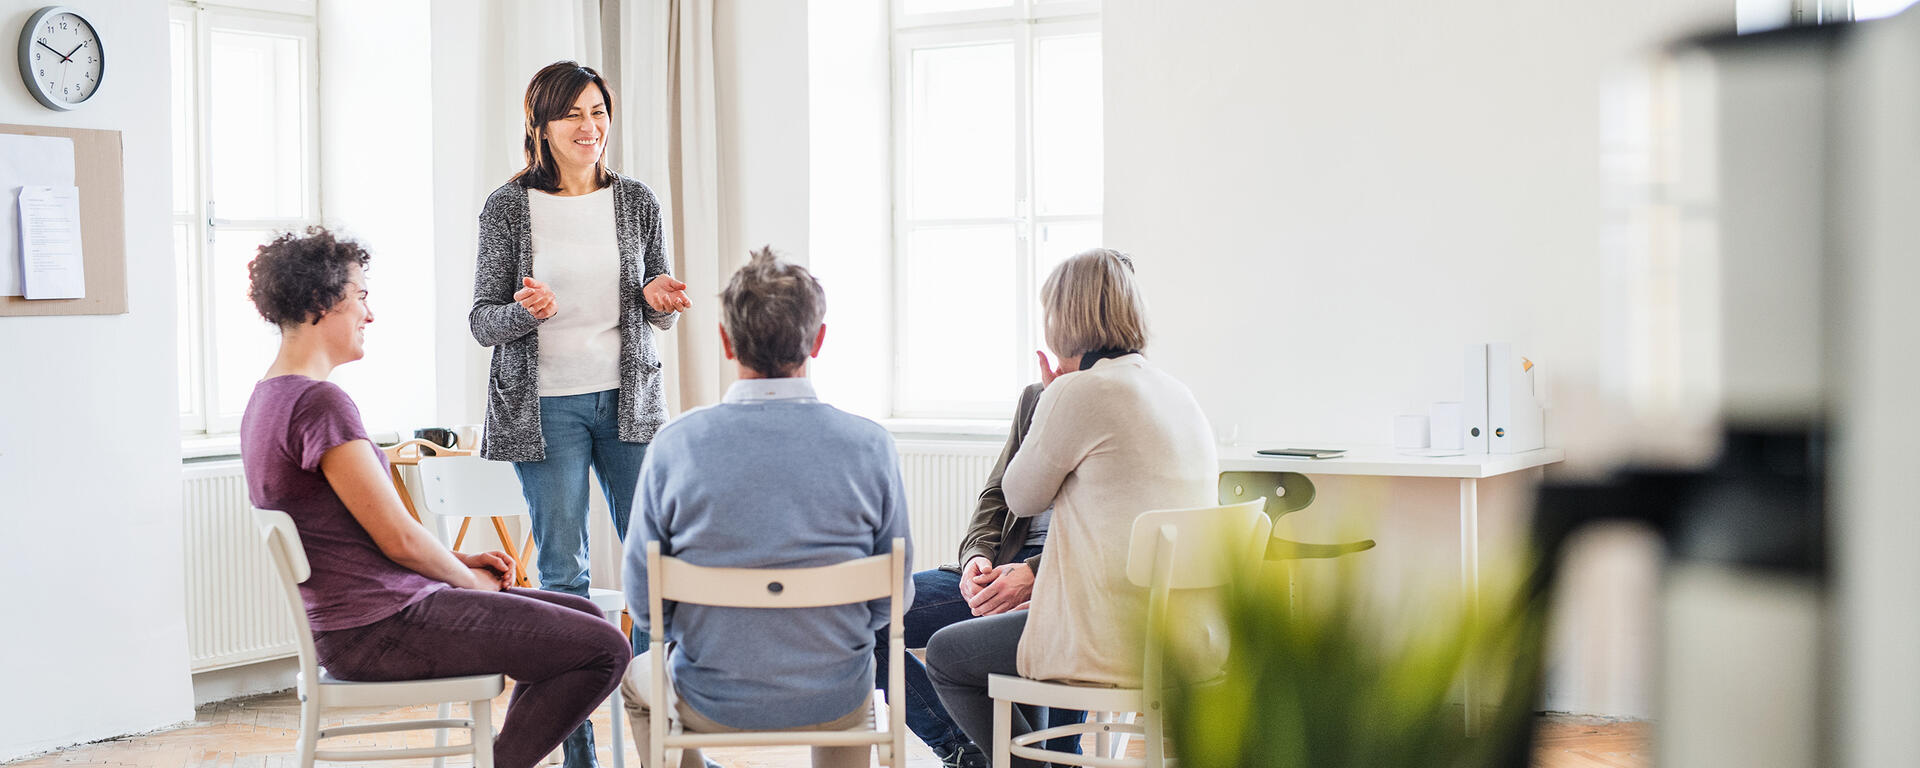 Stock photo of a group of people sitting together having a discussion. With one female standing and smiling